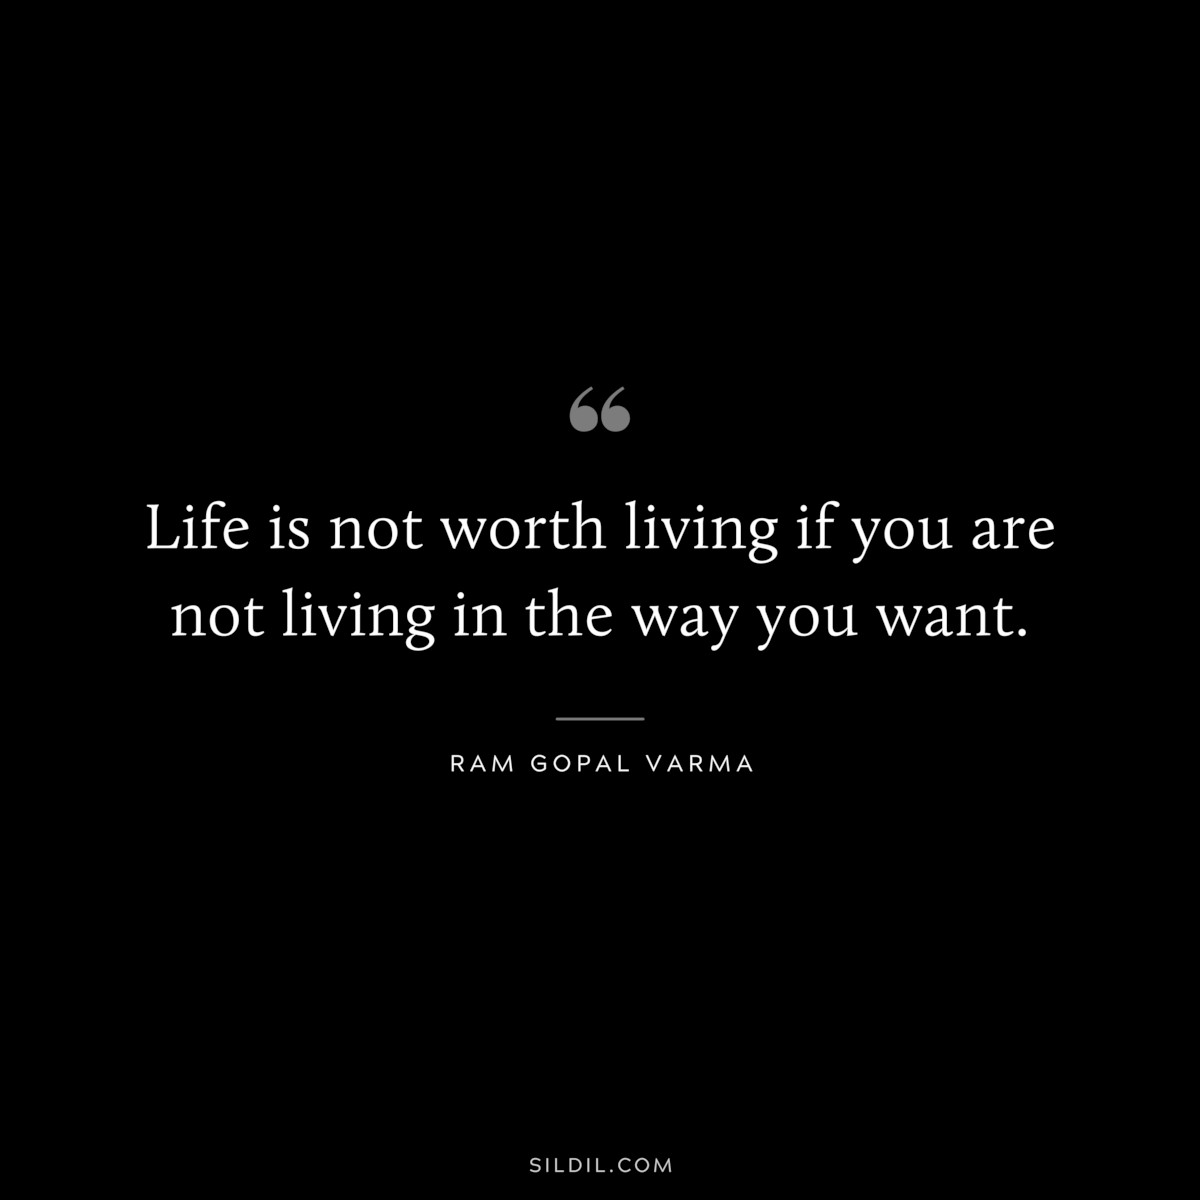 Life is not worth living if you are not living in the way you want. ― Ram Gopal Varma